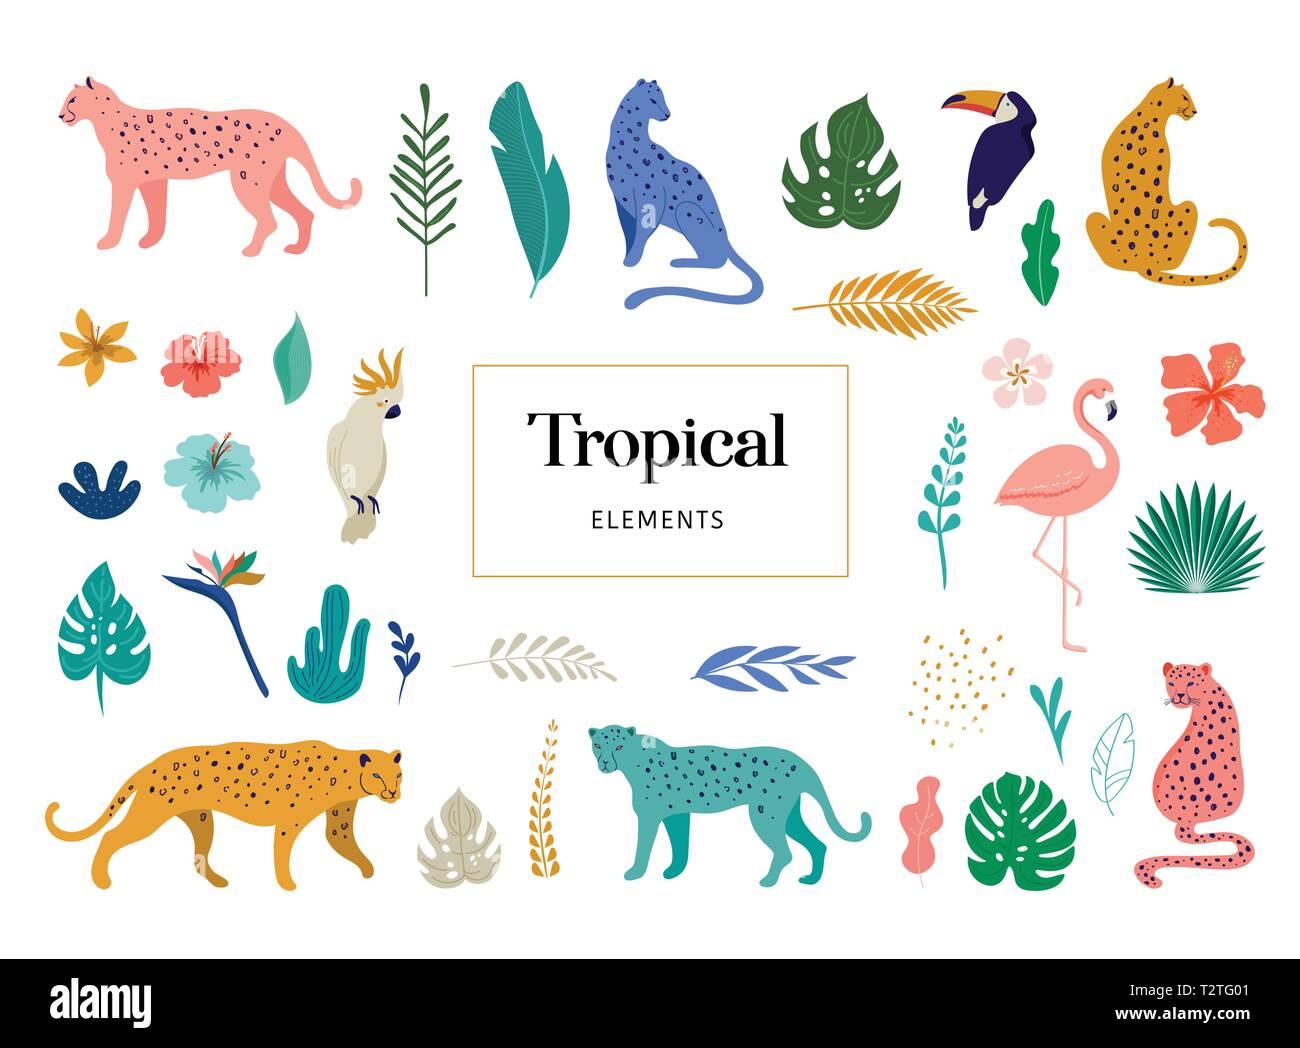 Tropical exotic animals and birds - leopards, tigers, parrots and toucans vector illustration. Wild animals in the jungle, rainforest Stock Vector